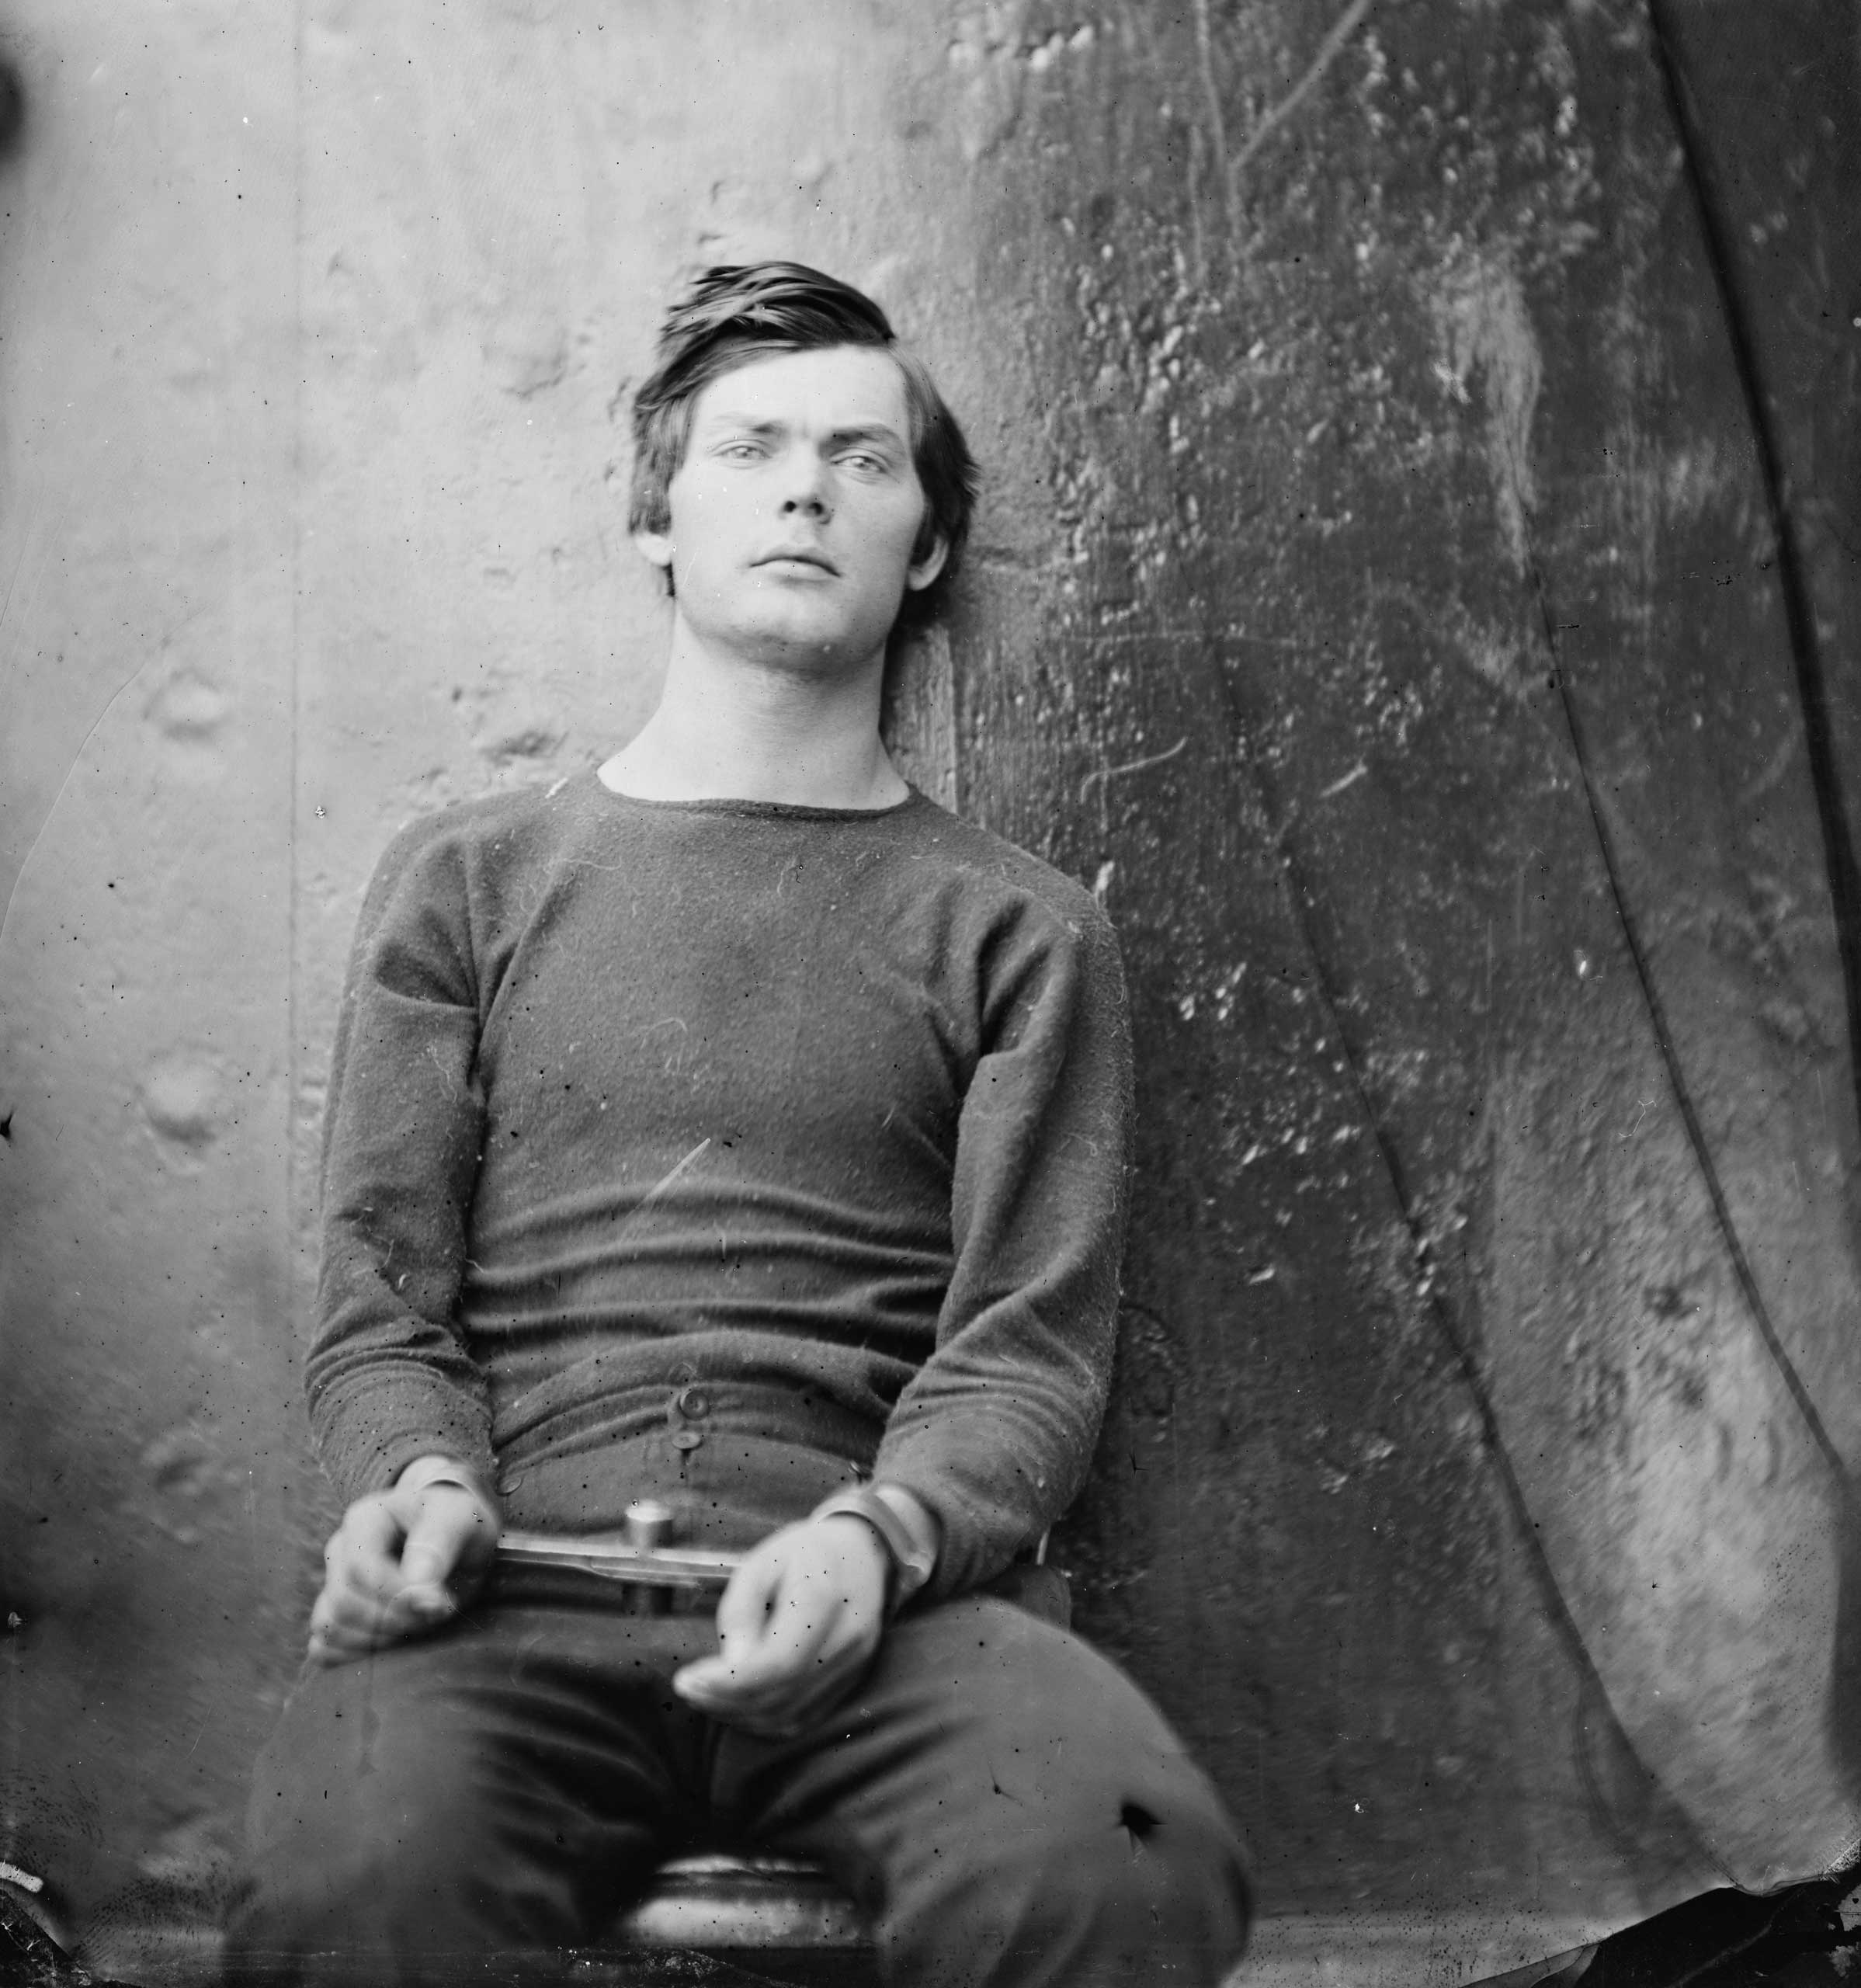 Lewis Payne, a conspirator in the assassination of President Lincoln, in the Washington Navy Yard, April-July 1865.